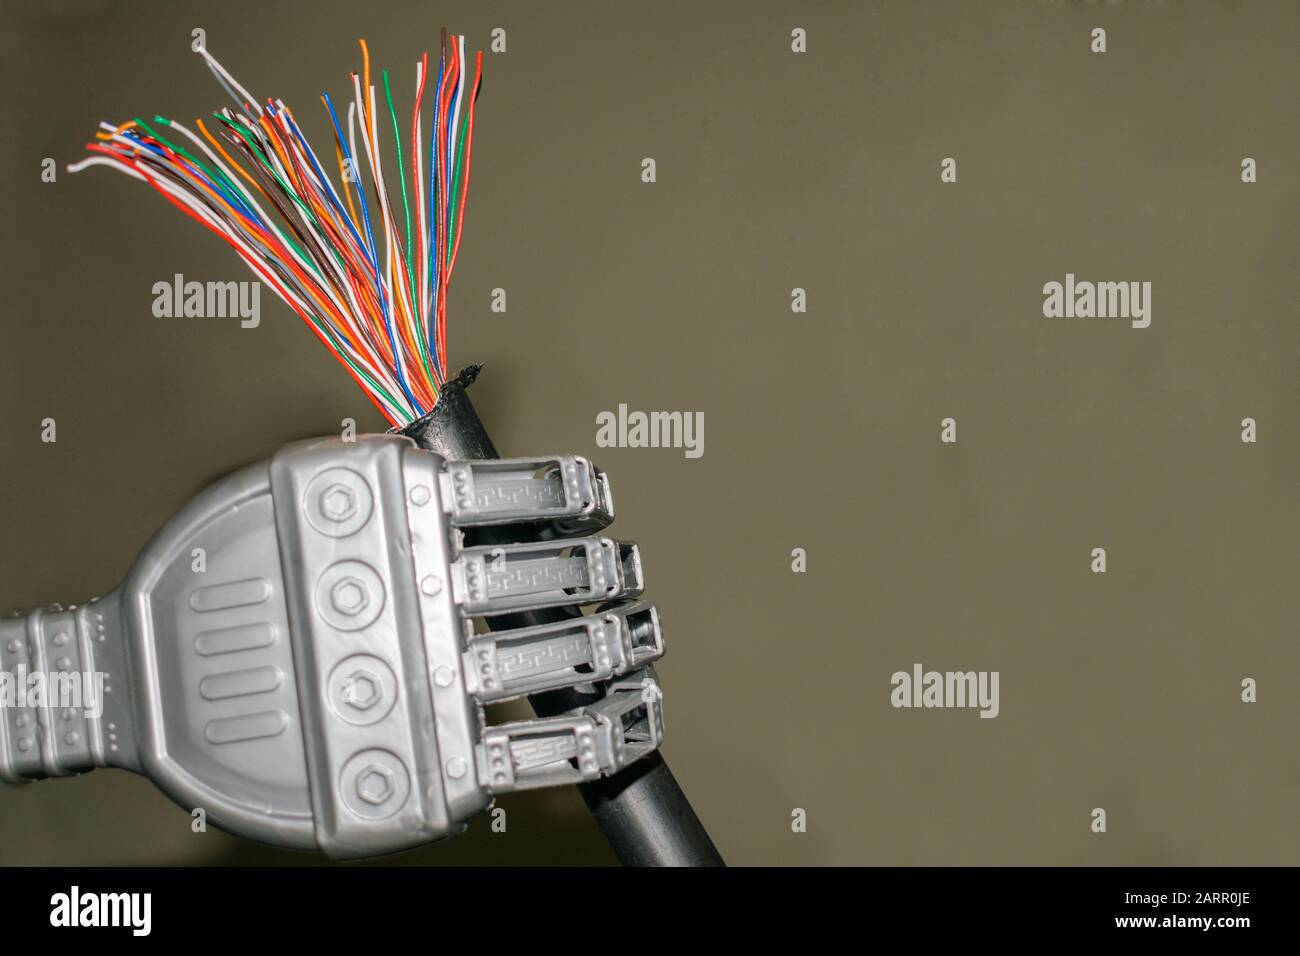 The trunk colored telephone cable is in the robot's hand. Damaged Internet cable close-up Stock Photo